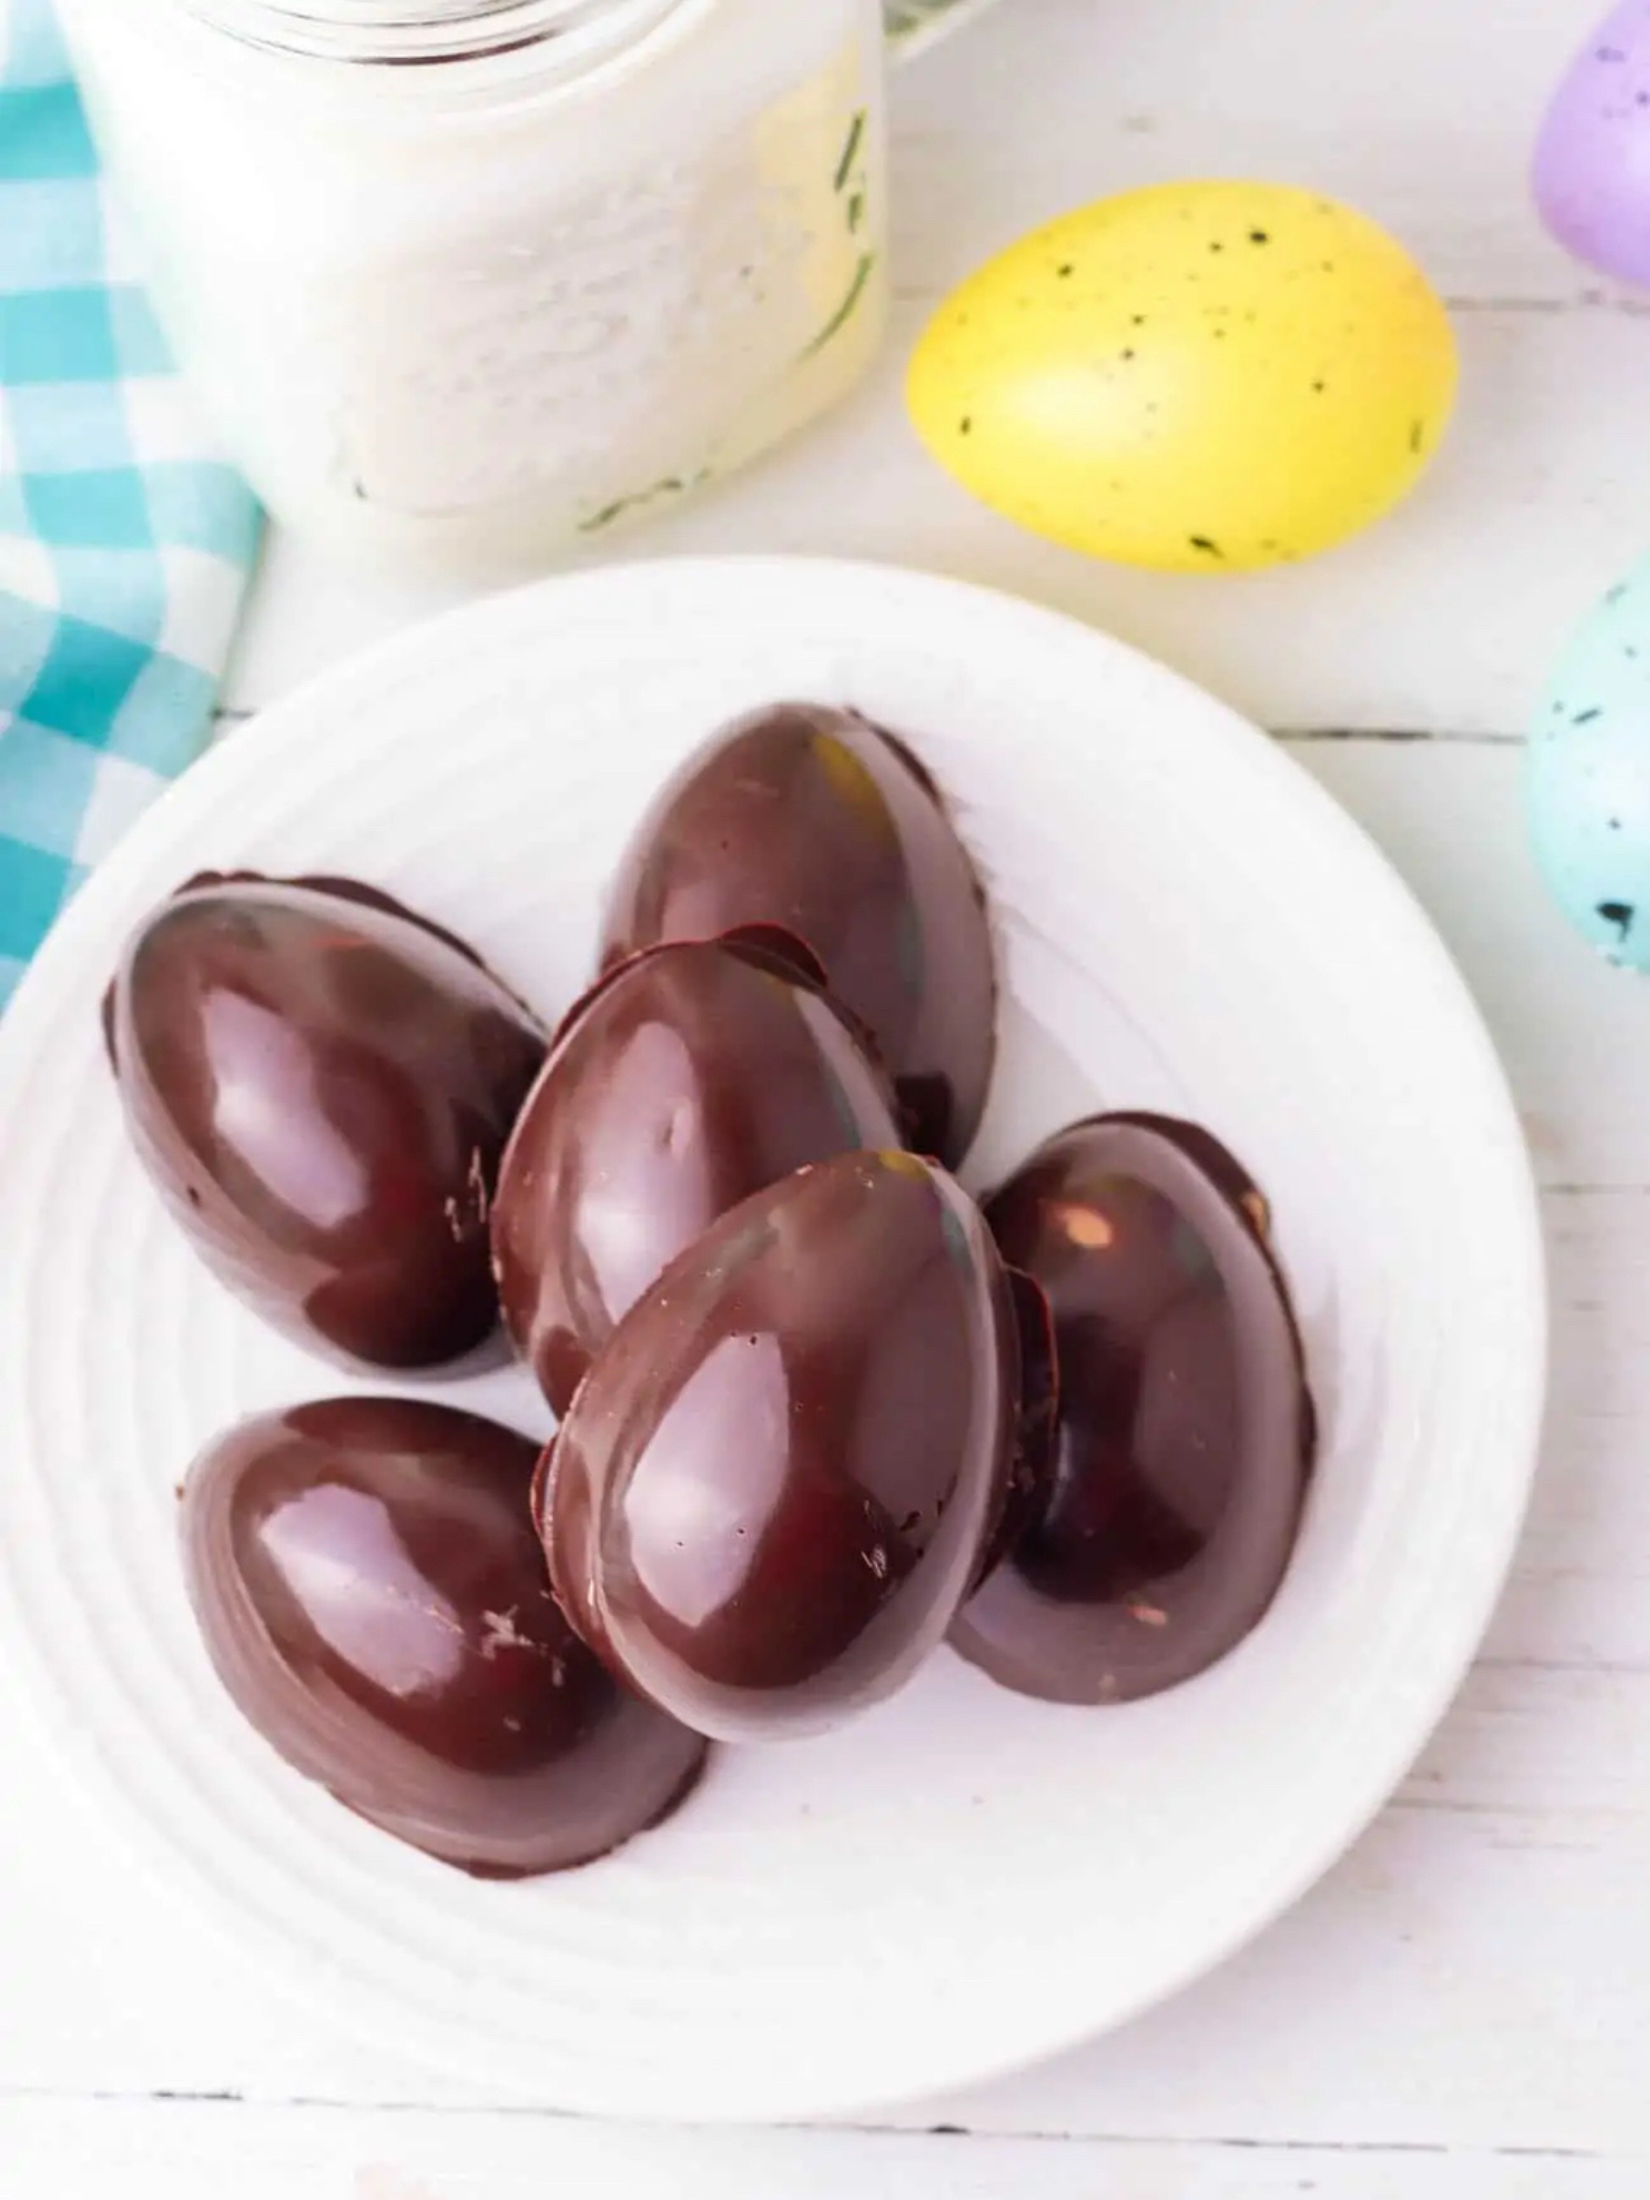 a delightful assortment of chocolate peanut butter eggs, featuring rich chocolate shells filled with creamy peanut butter centers.